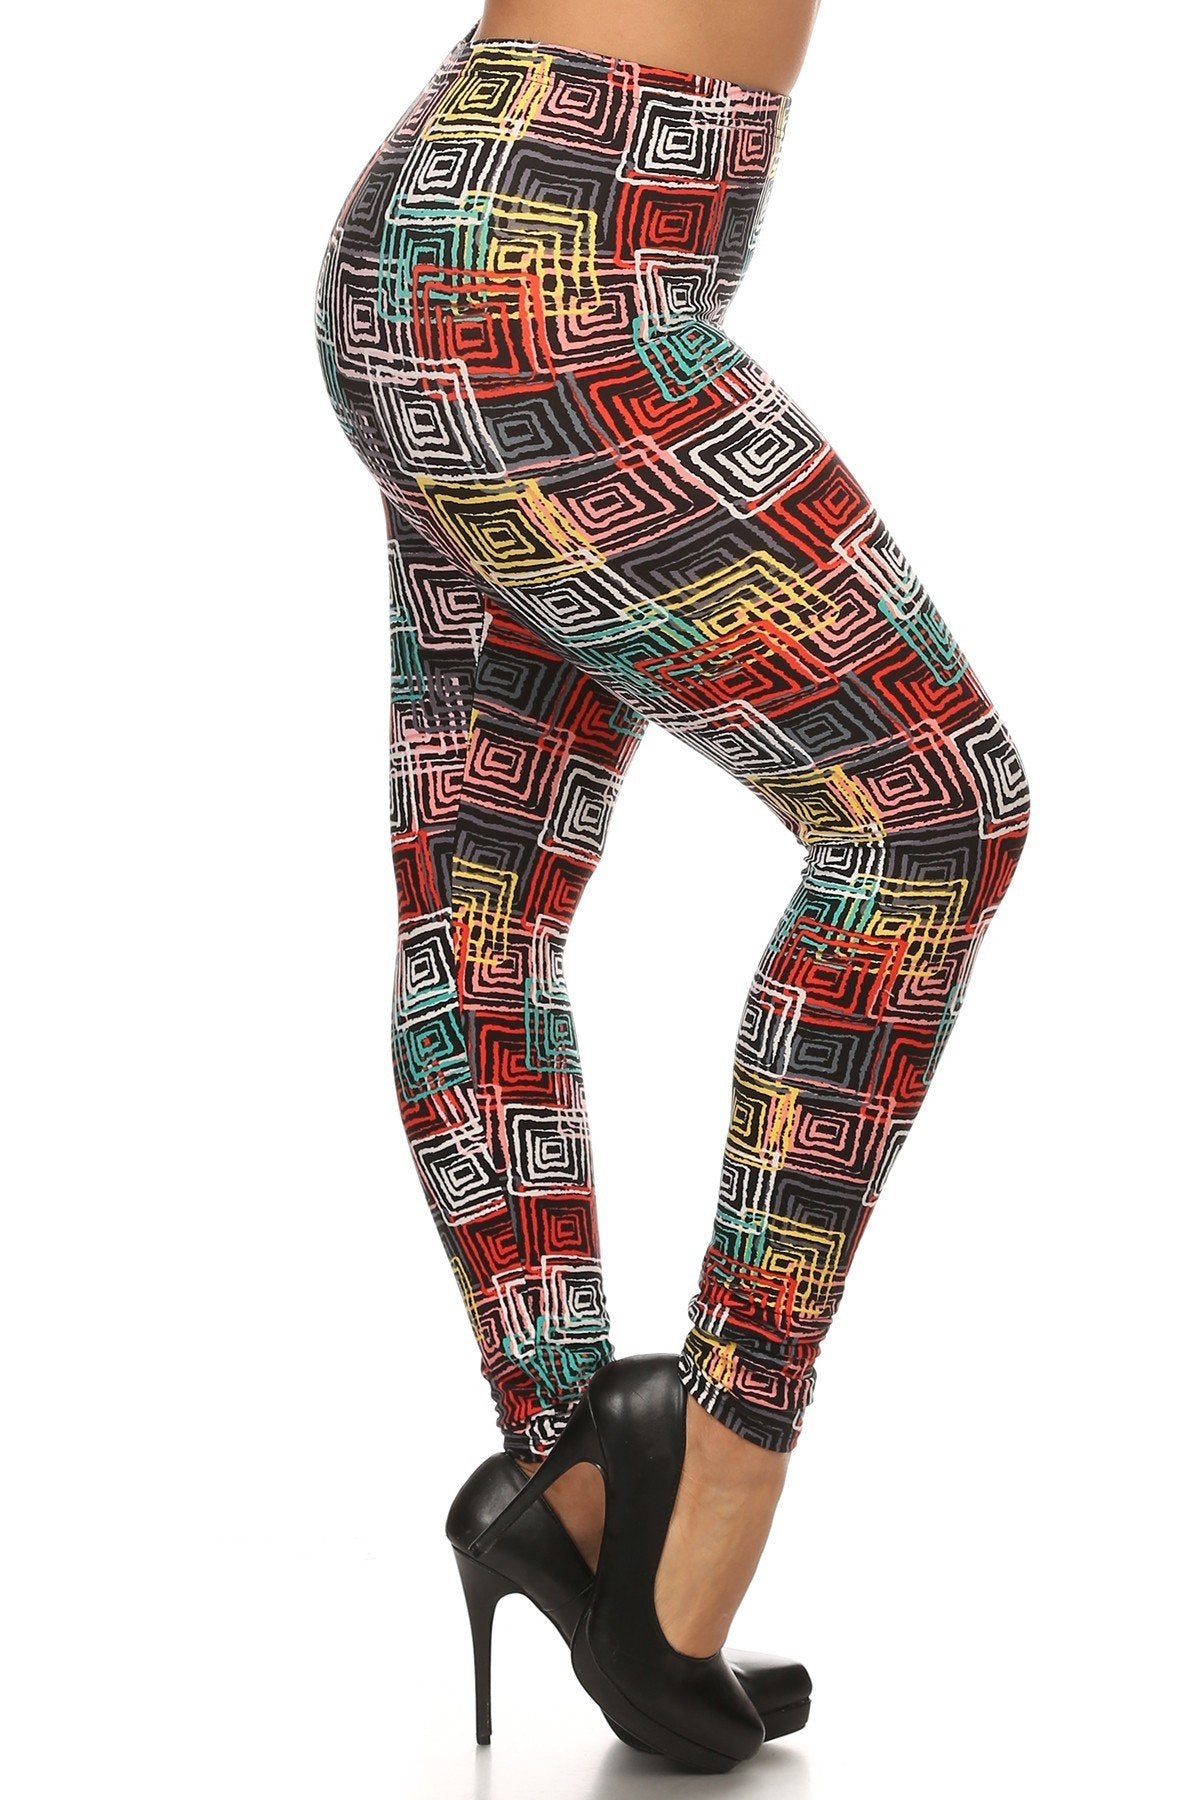 Abstract Geometric Printed Knit Legging With Elastic Waistband, And High Waist Fit - K I T S H O P 